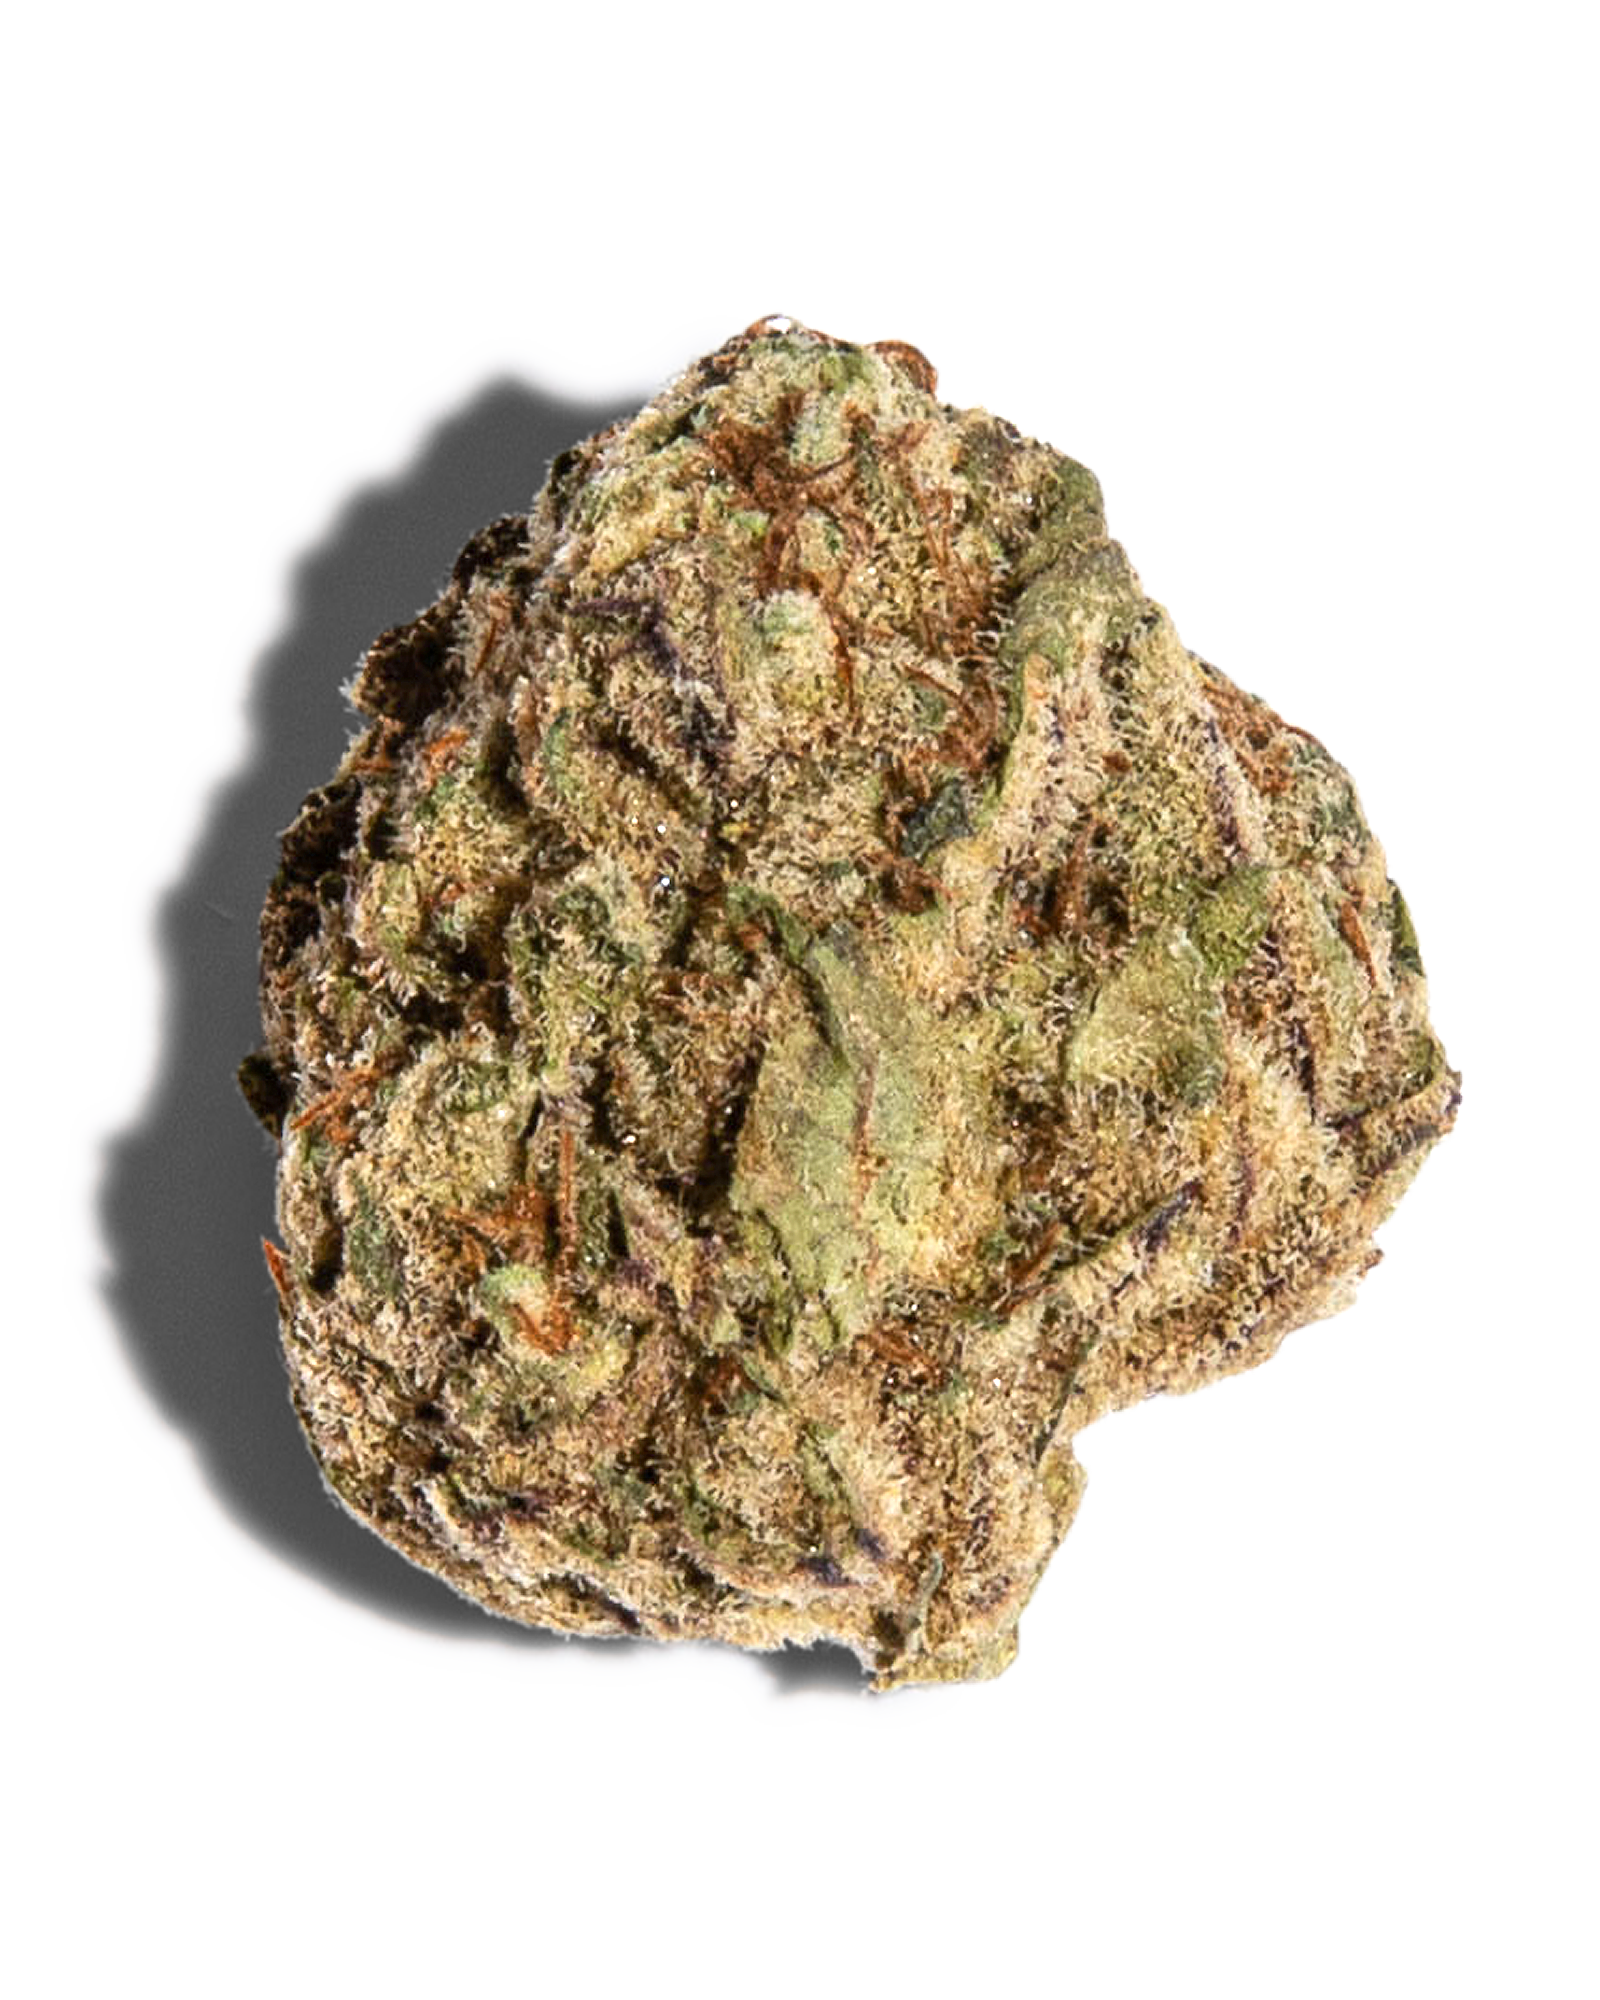 Buy Rockstar x Death Bubba— AAA+ at ONLYGAS: Canada's Best Online Weed  Dispensary